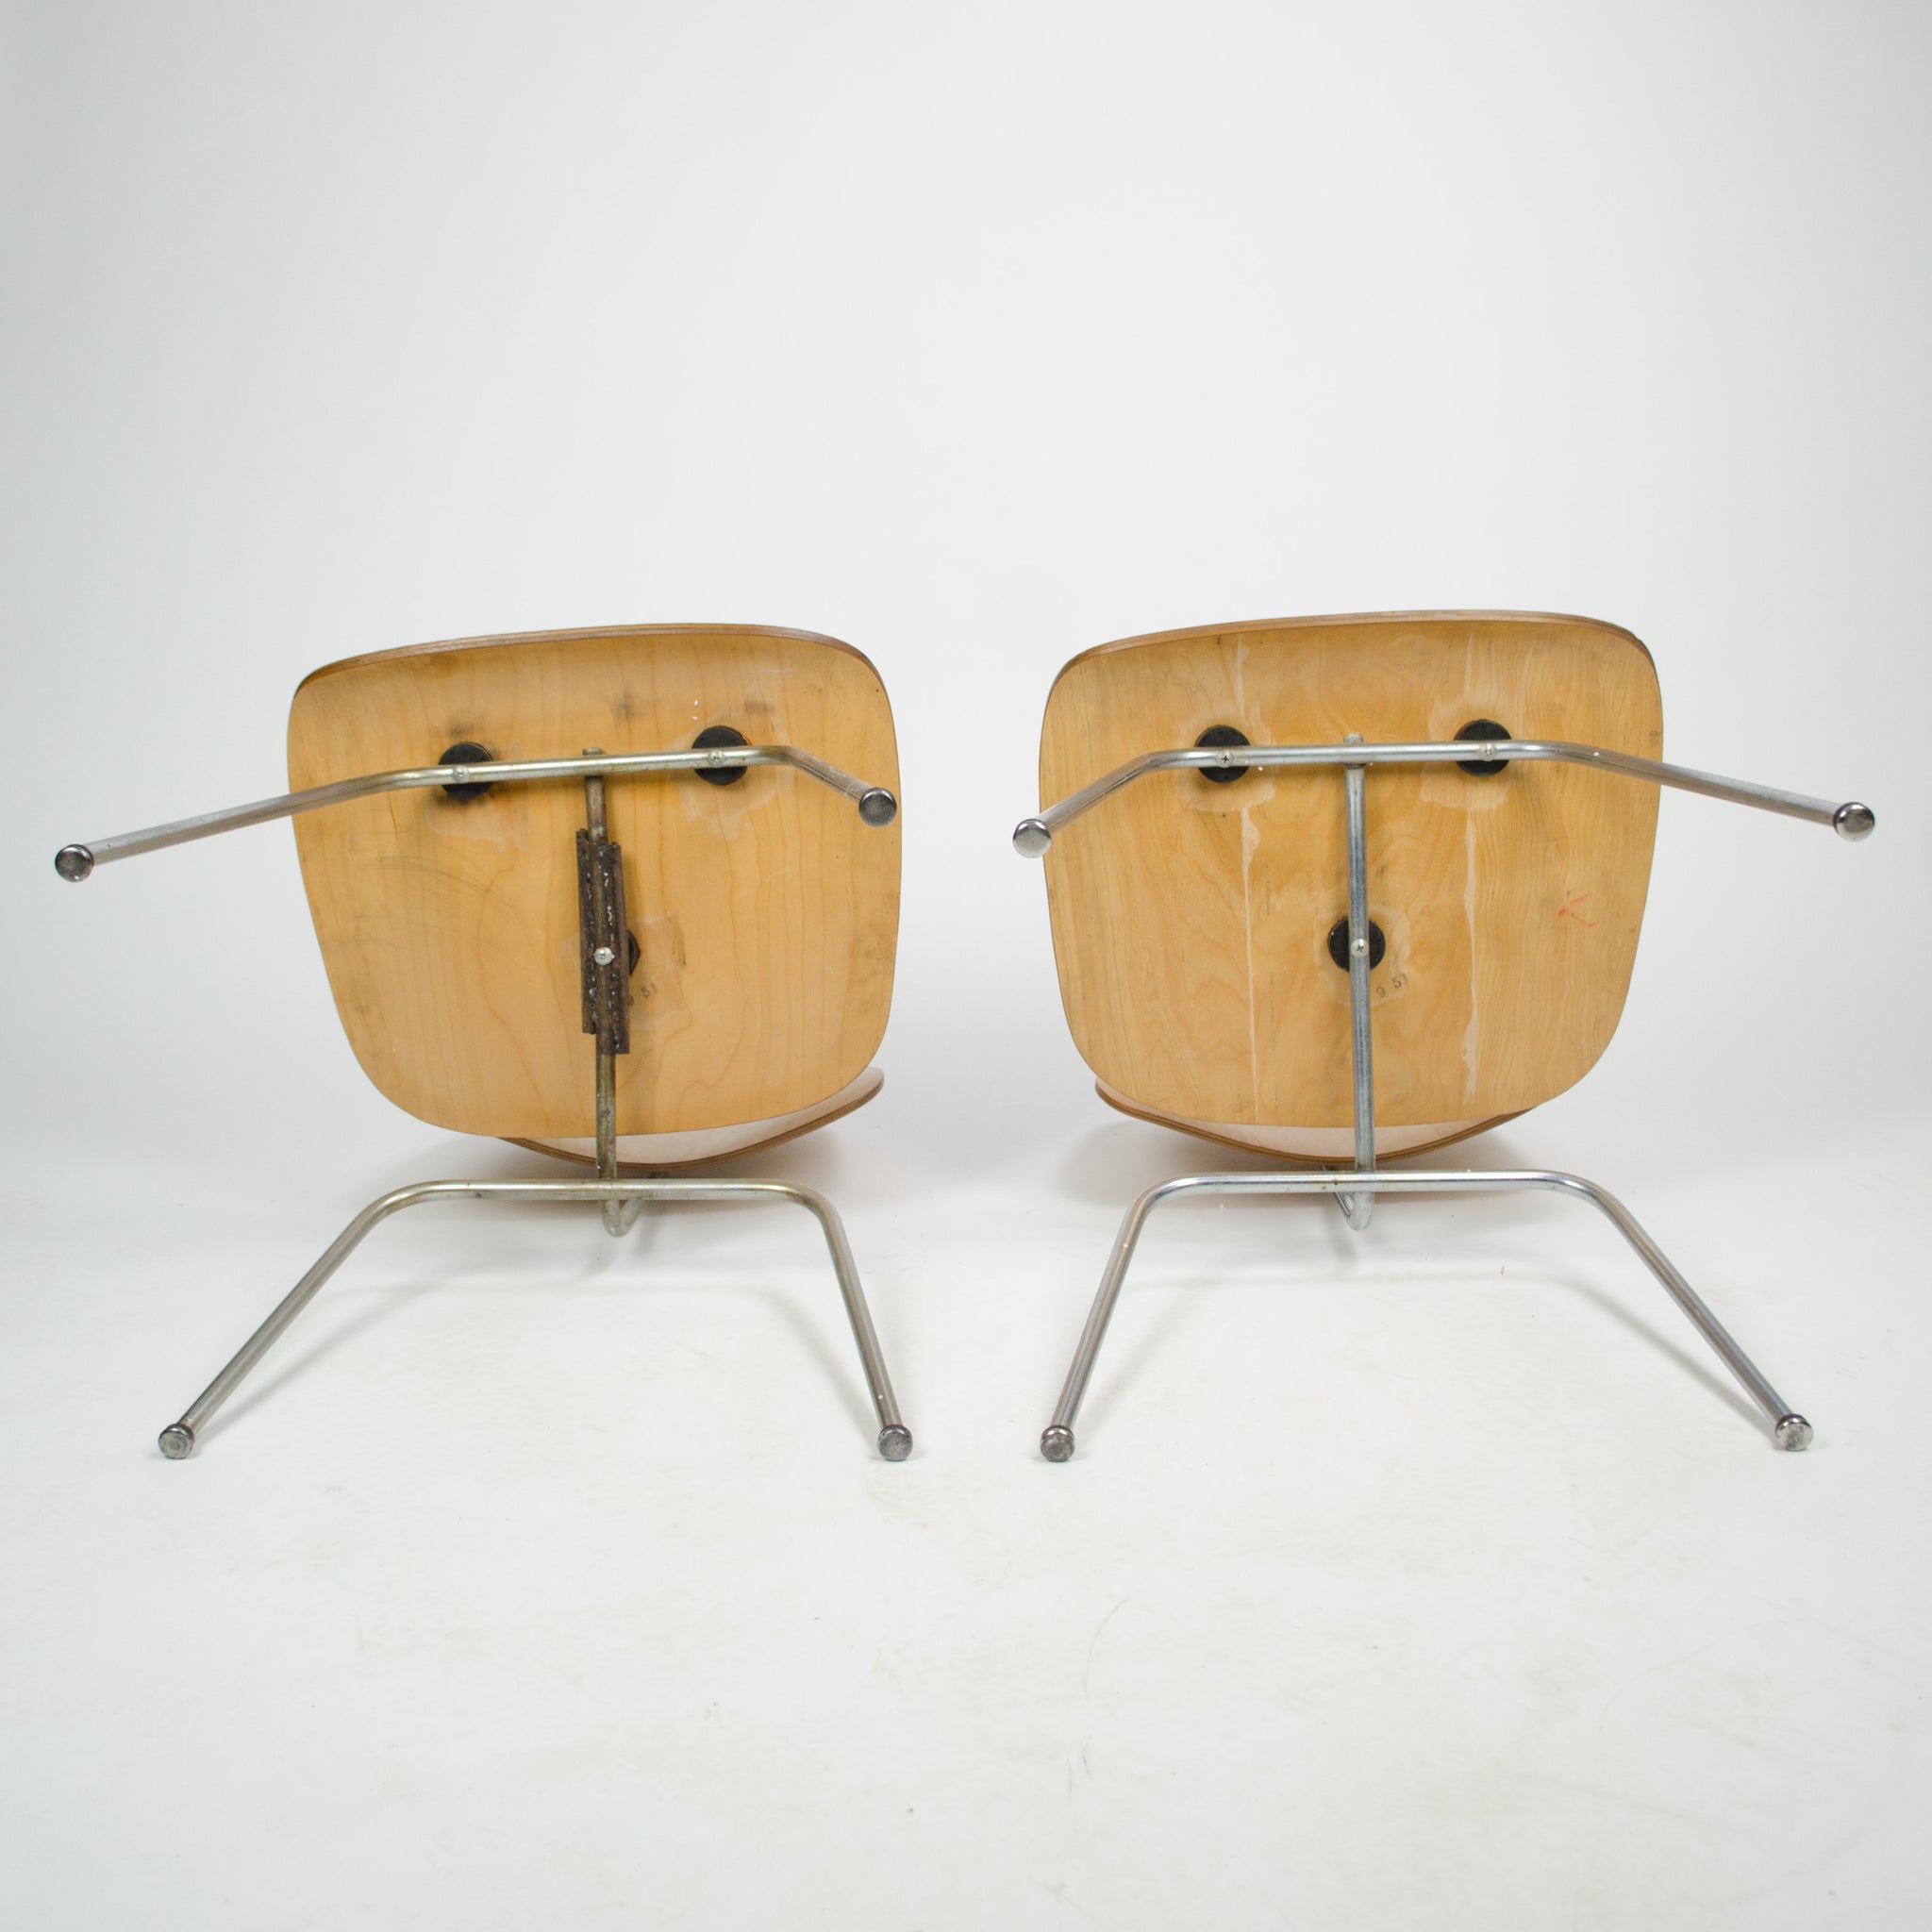 SOLD Pair of Eames for Herman Miller 1951 DCM Dining Chairs Maple Natural (Price for pair)